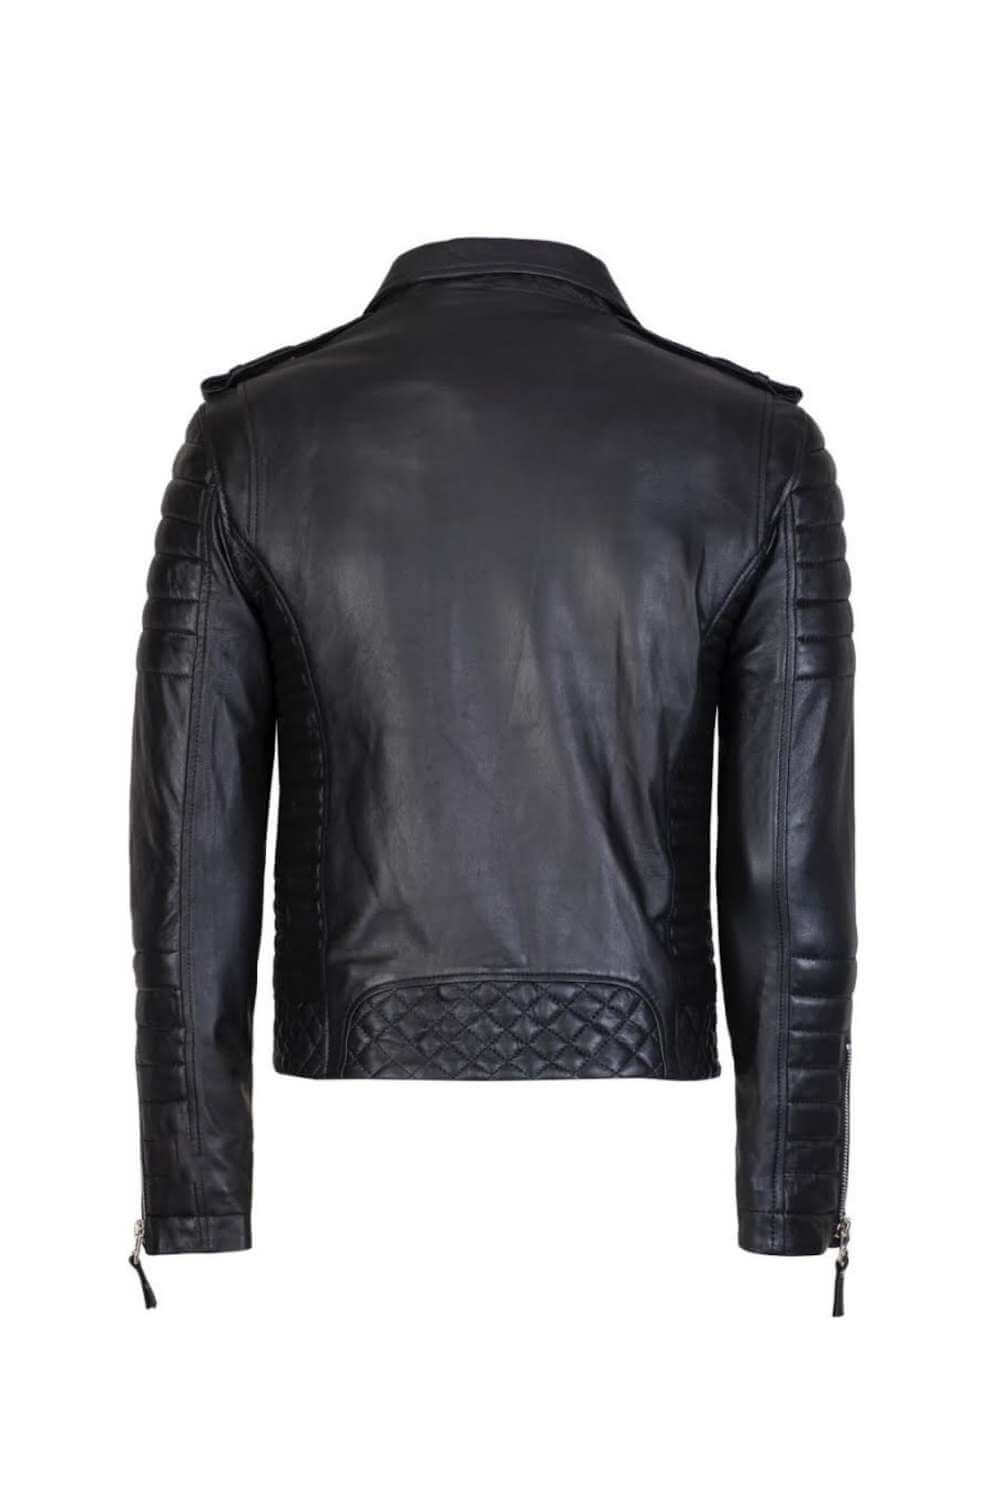 Men's Black Asymmetrical Biker Style Quilted Leather Jacket | Throblife